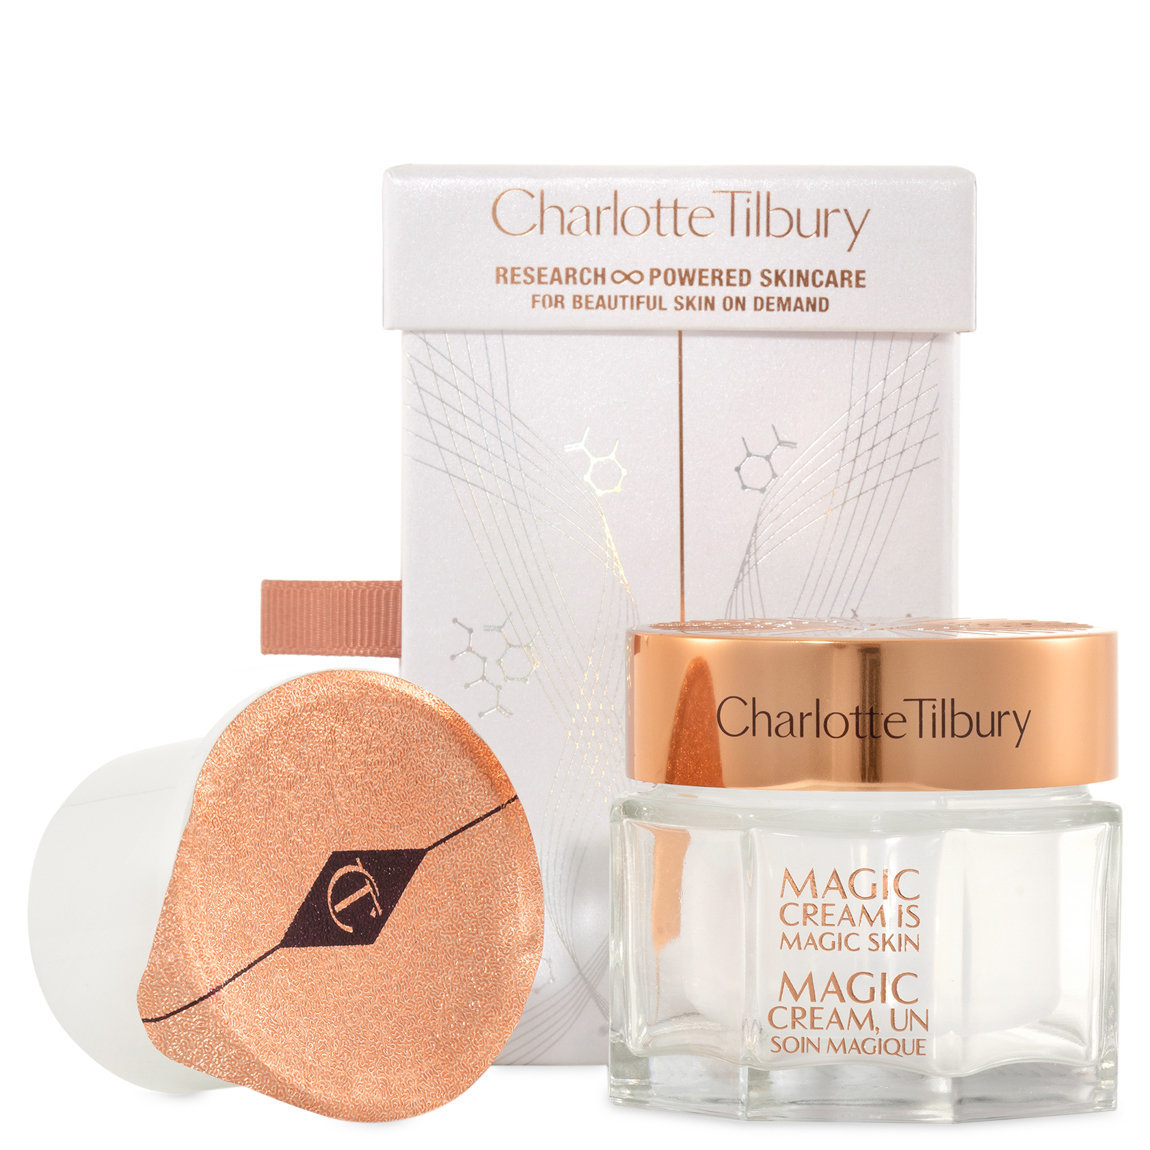 Charlotte Tilbury Limited Edition Magic Cream & Refill alternative view 1 - product swatch.